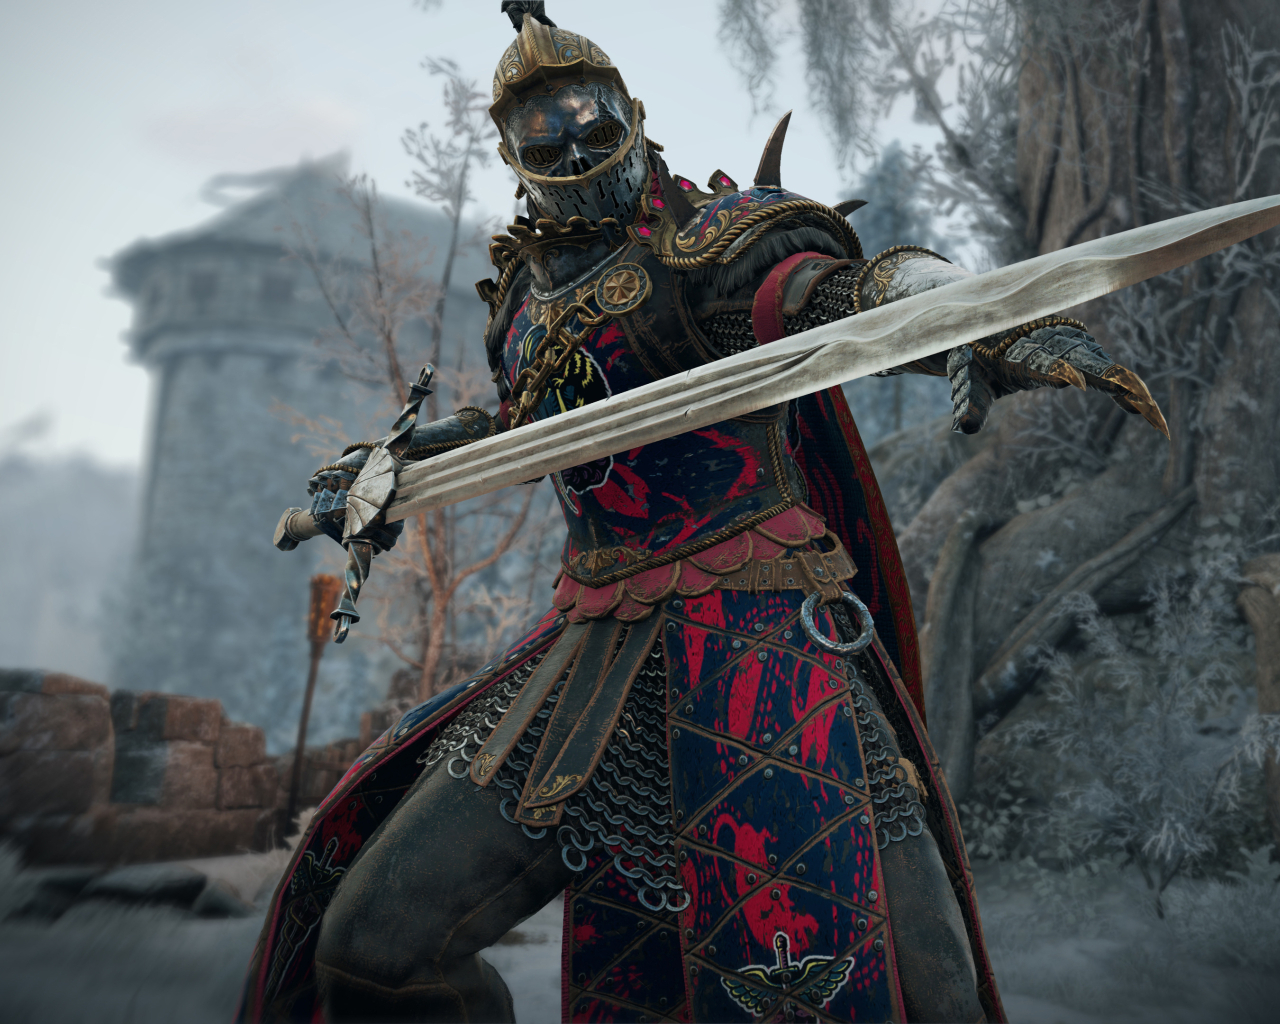 1280x1024 Warmonger For Honor 1280x1024 Resolution Wallpaper, HD Games 4K W...